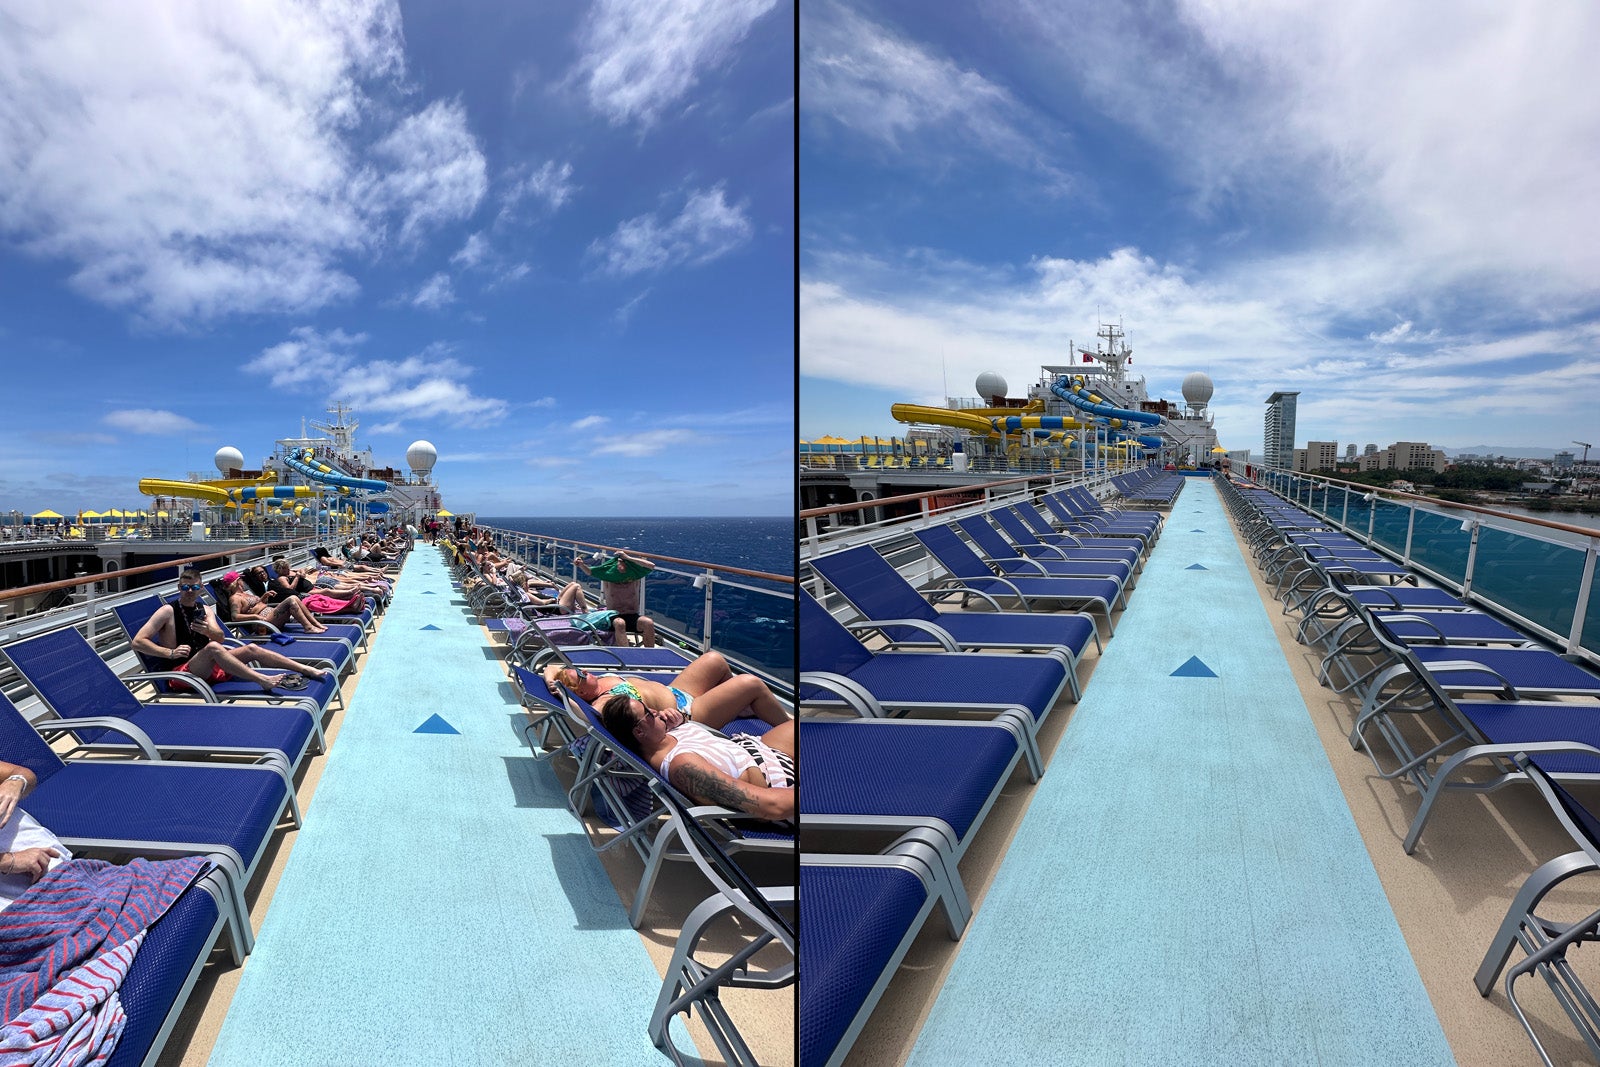 Deck chairs on a cruise ship on a sea day versus a port day